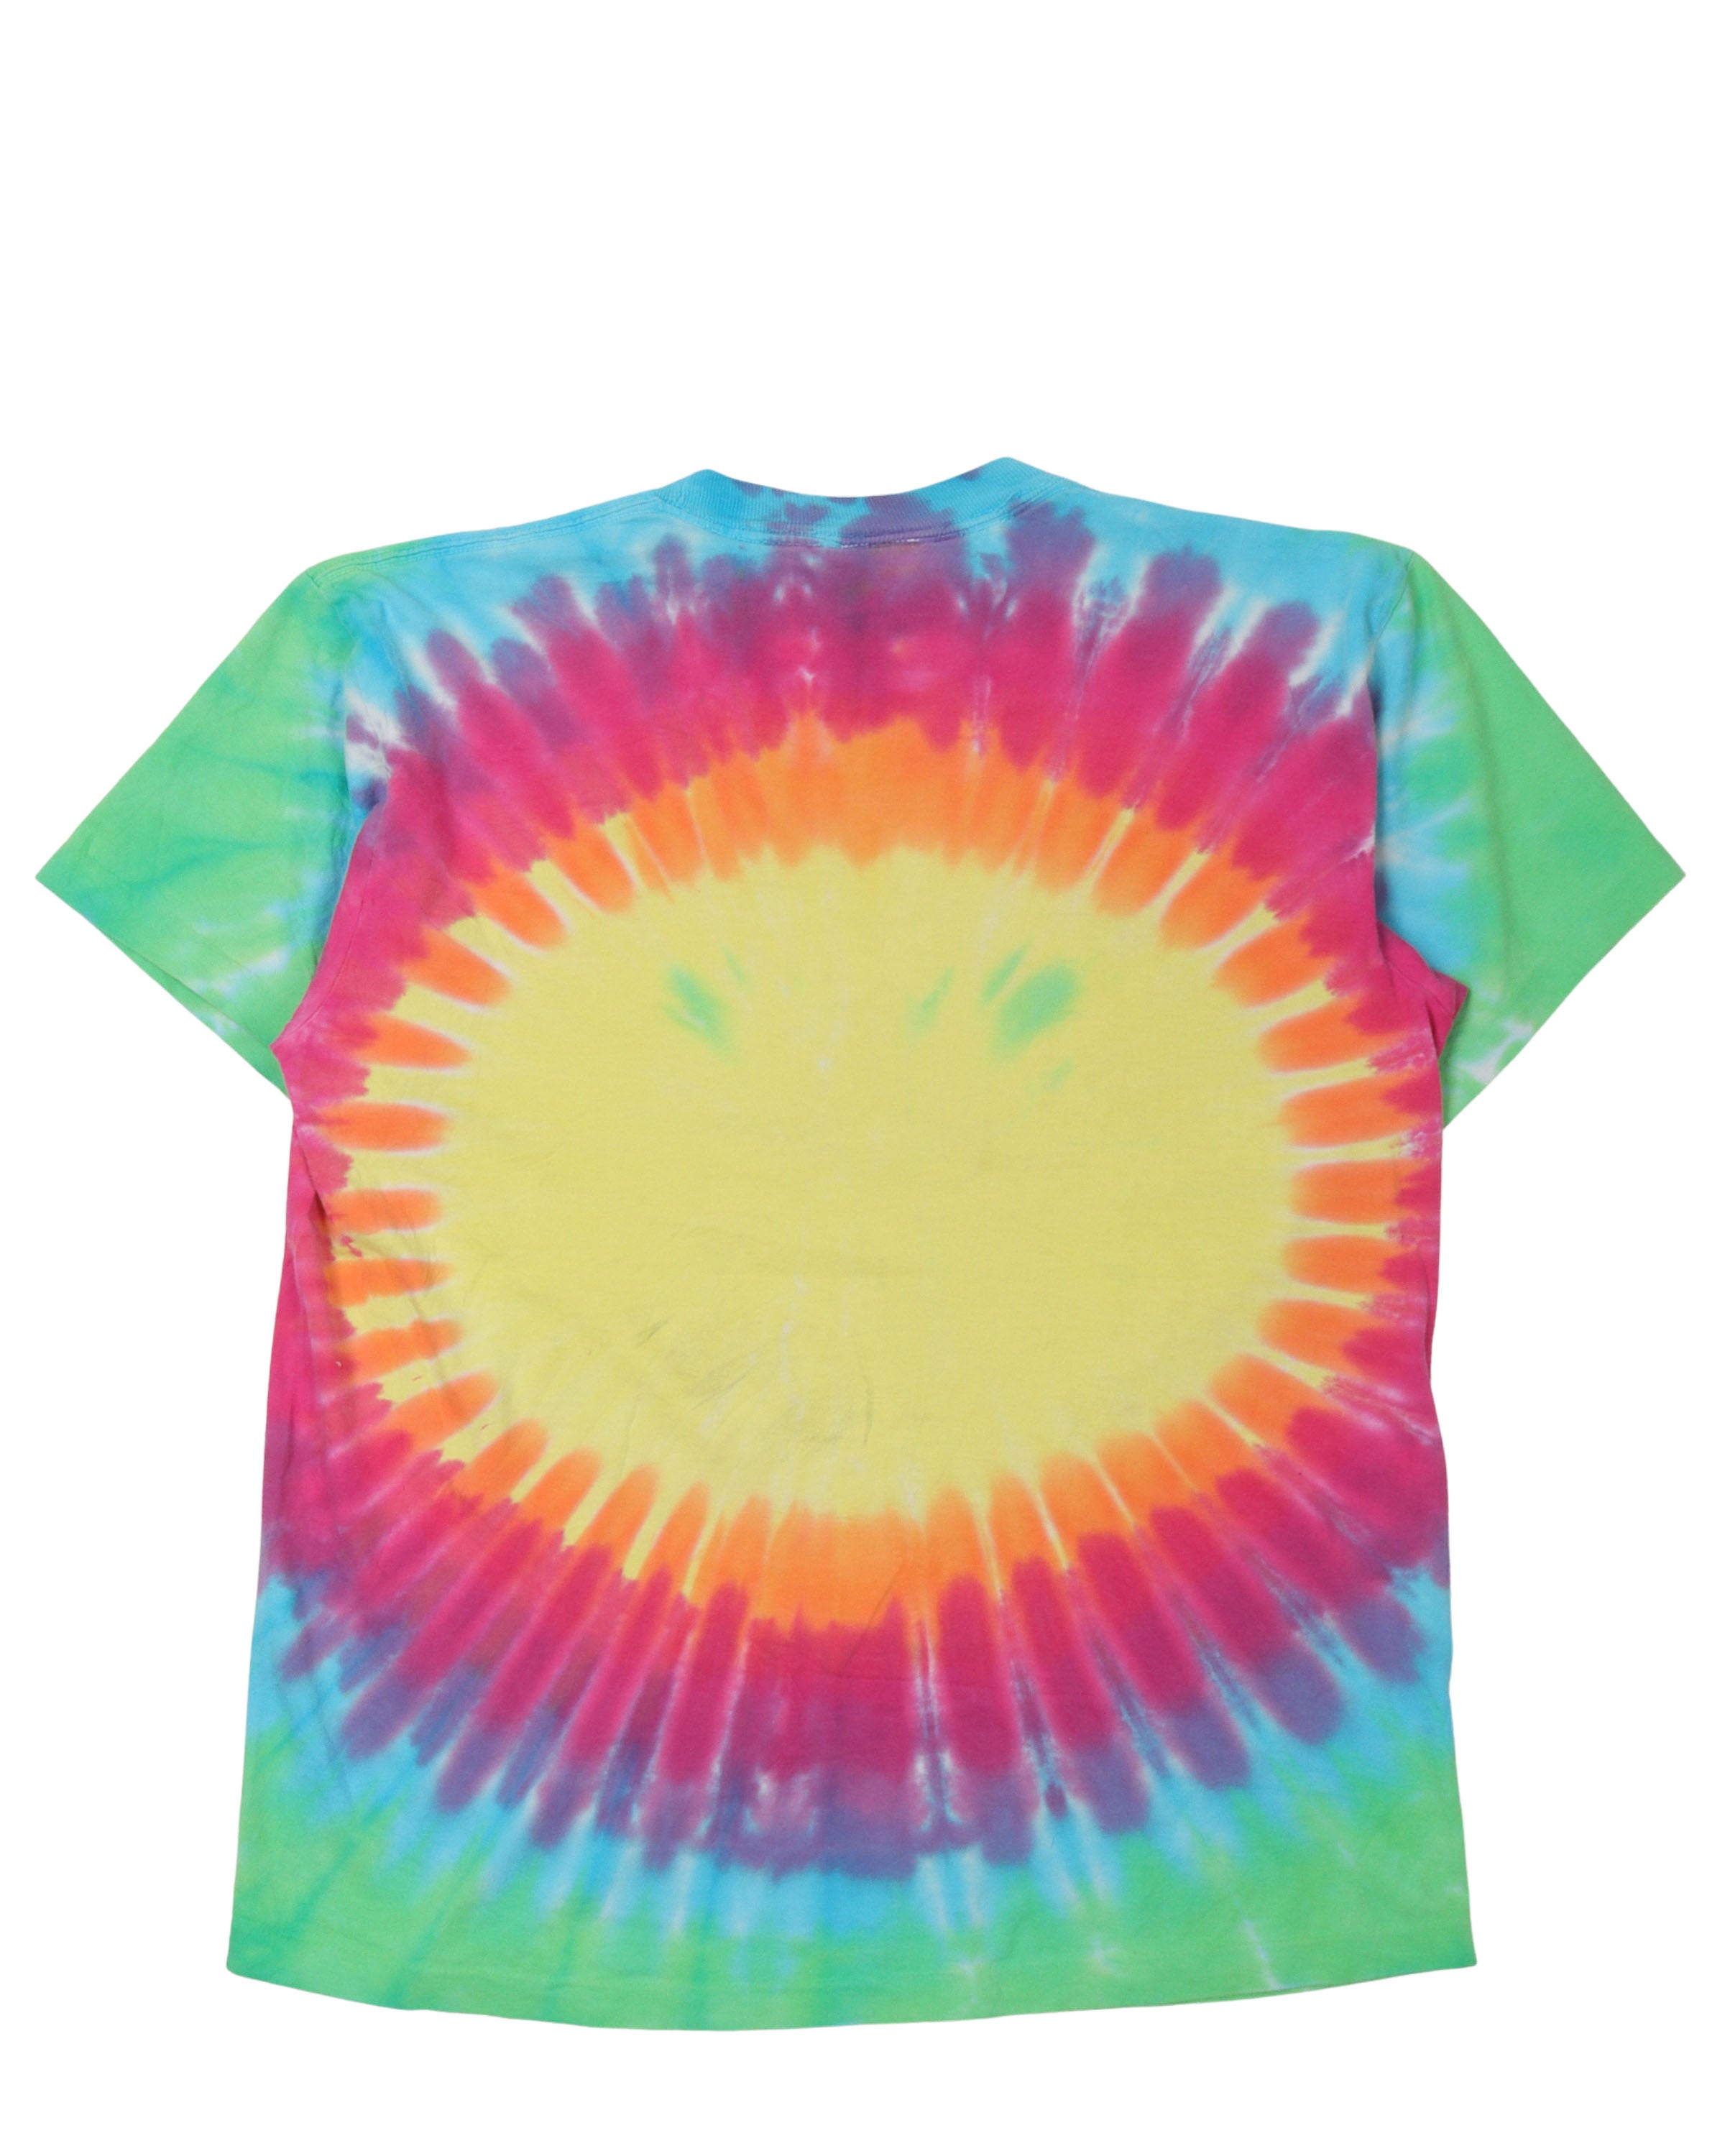 Grateful Dead "Everybody's Dancing In a Ring Around the Sun" Tie Dye T-Shirt